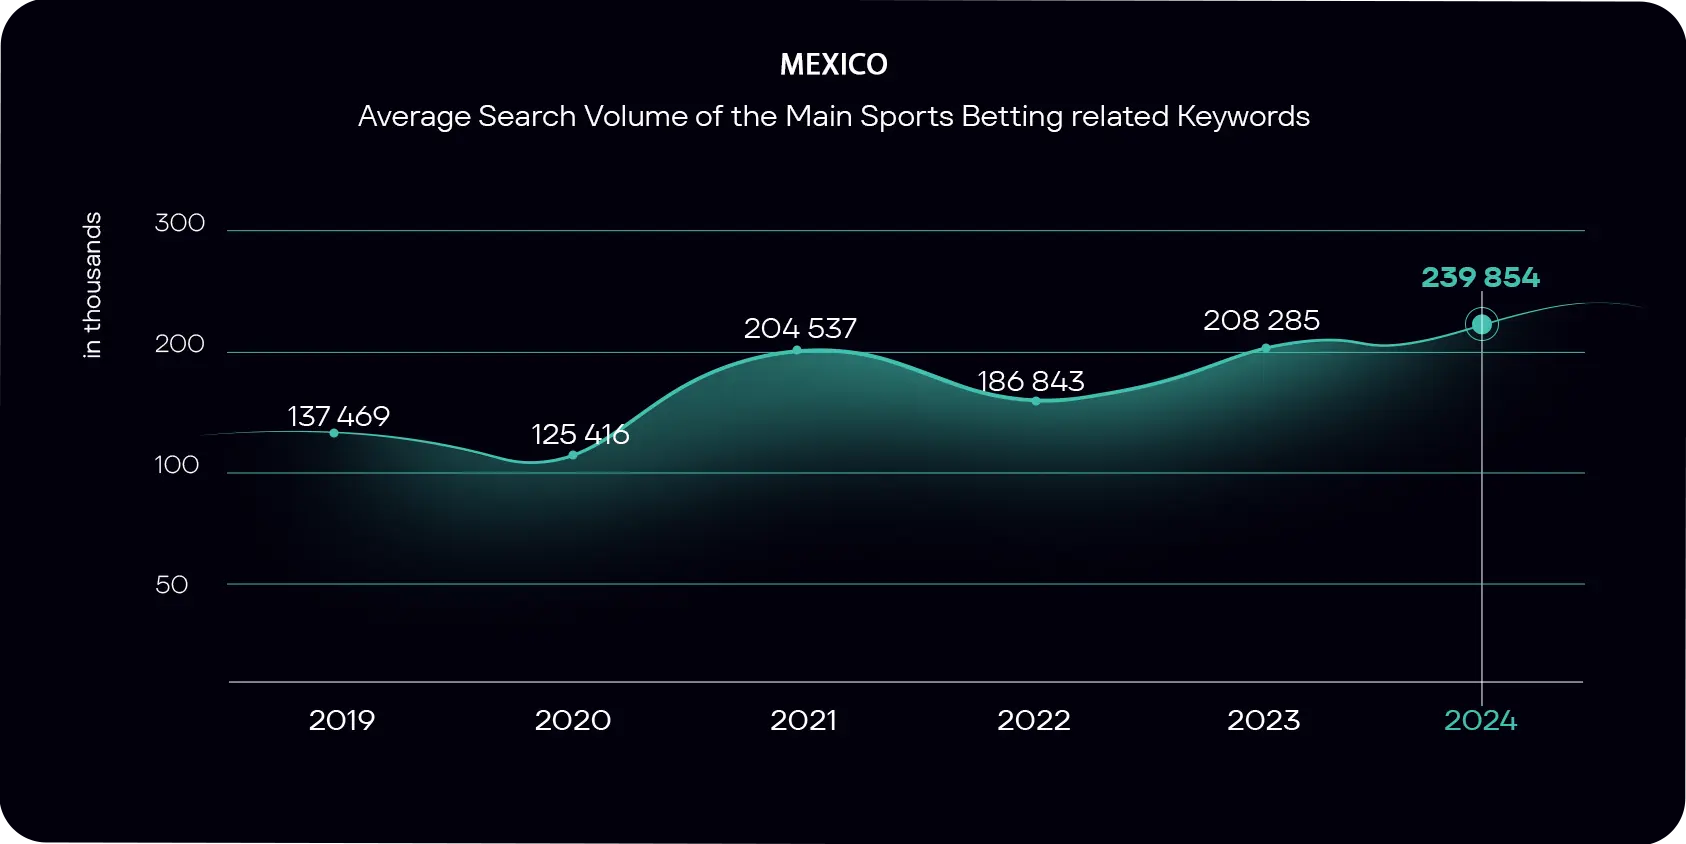 How many people search for sports betting related keywords in Mexico